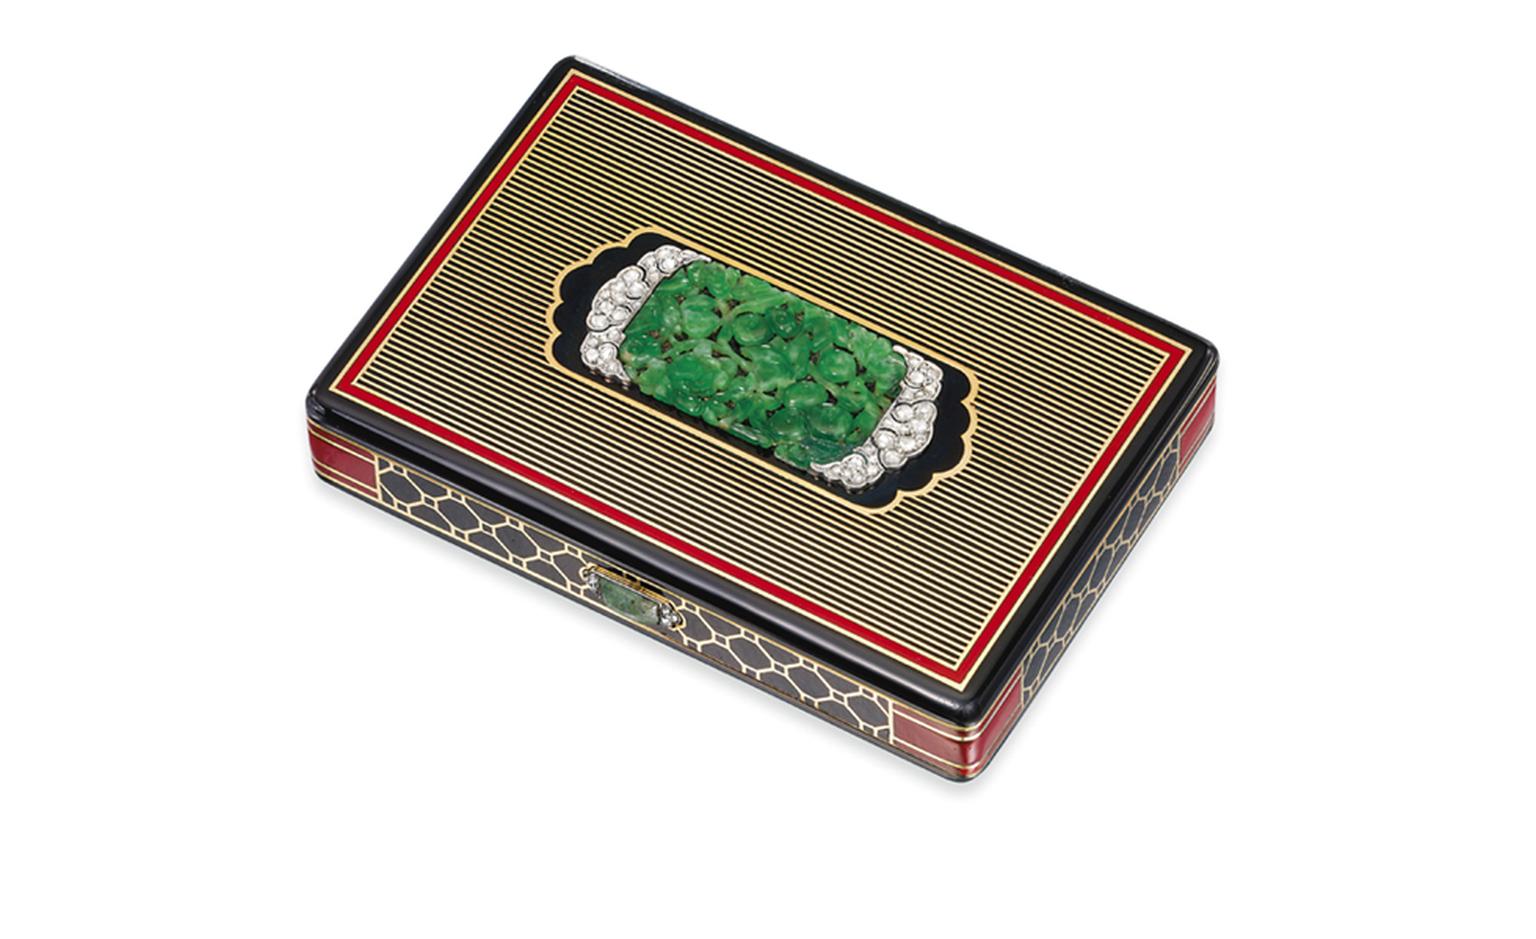 Lot 112. An art deco jade, diamond and enamel vanity case, by Cartier. Estimate £3,000-£4,000. SOLD FOR £27,500